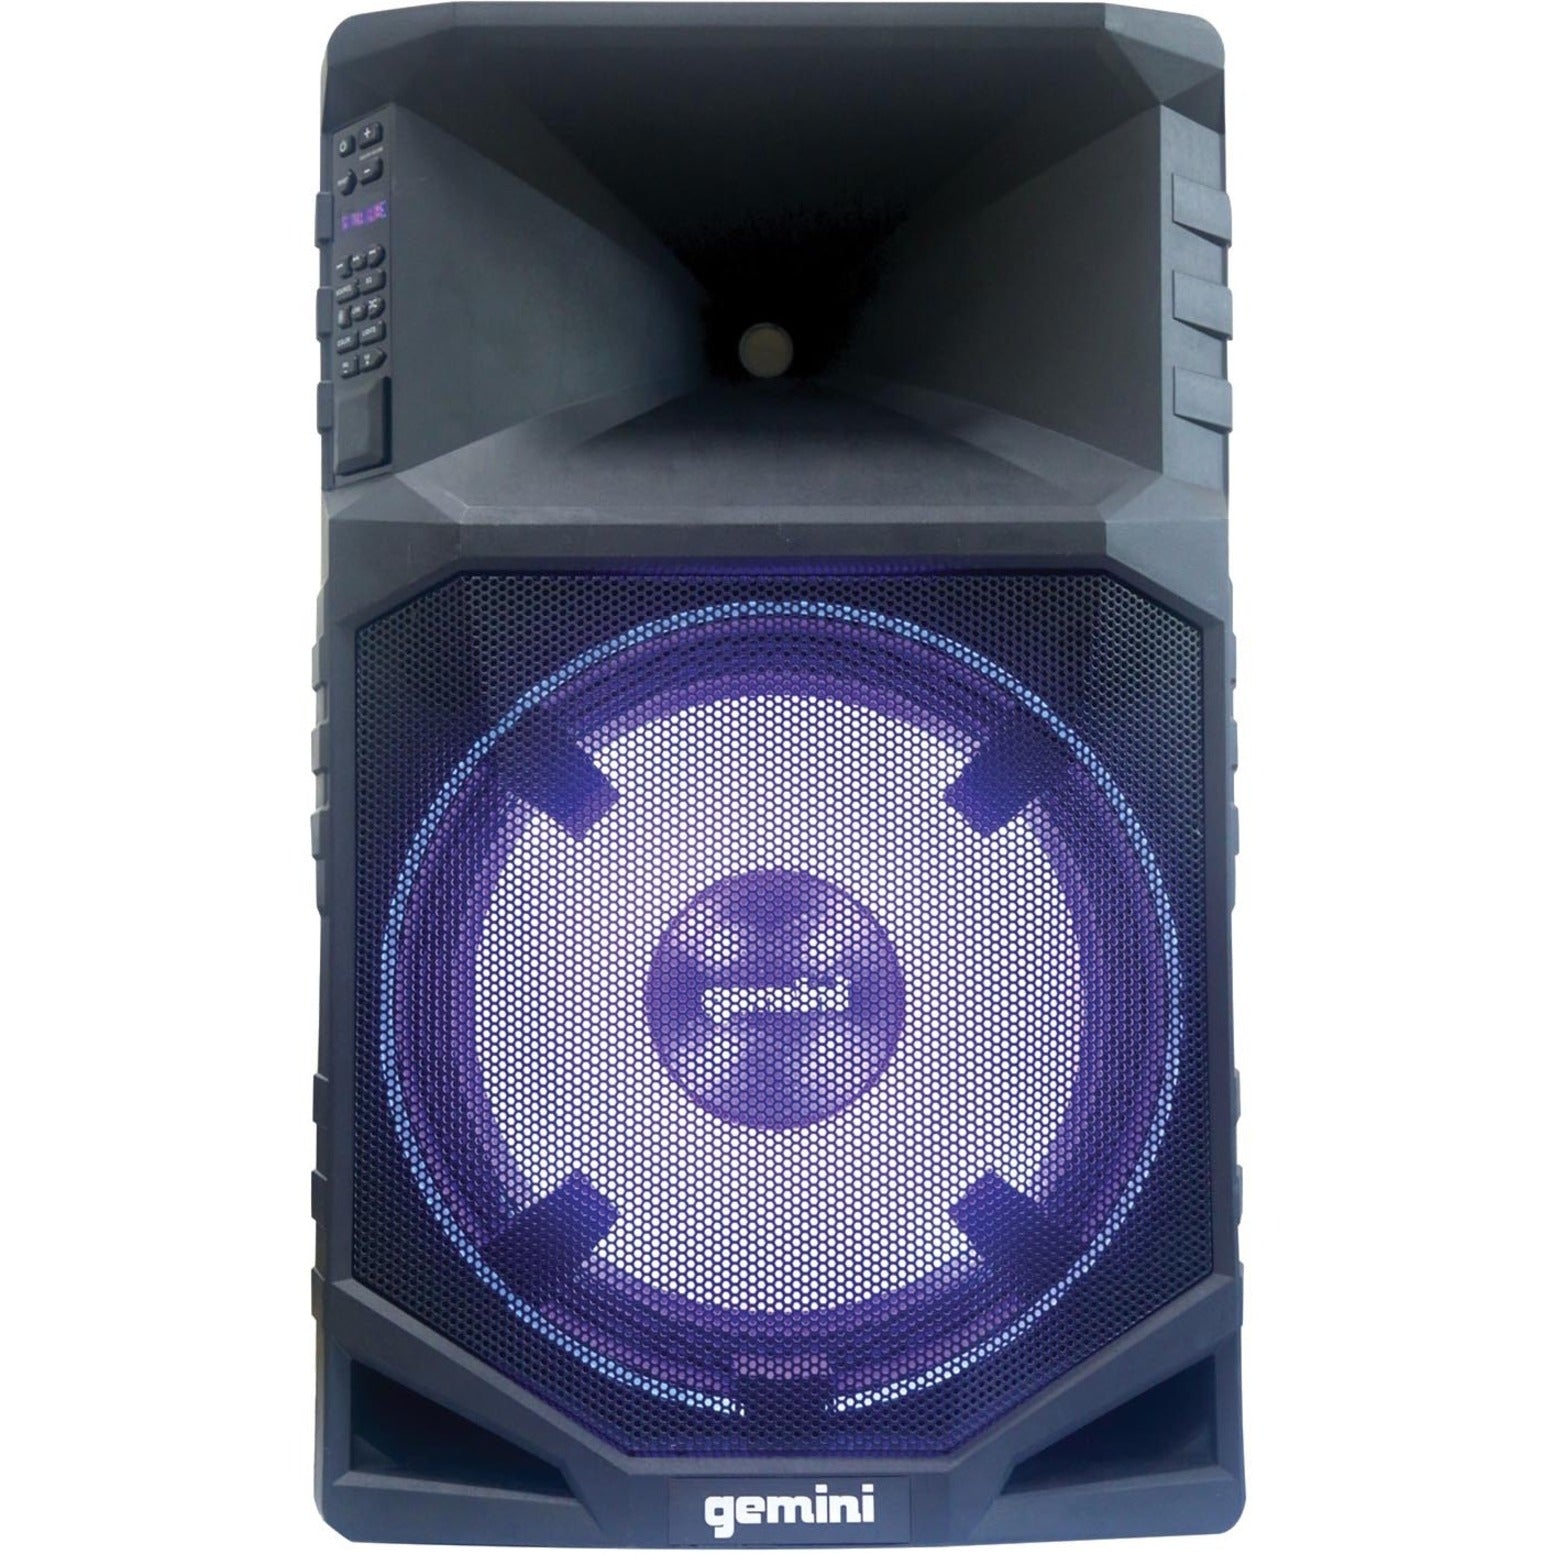 gemini GSW-T1500PK Public Address System, Weather Proof, IPX4, Built-in Rechargeable Battery, Radio, Media Player, Bluetooth, Portable [Discontinued]